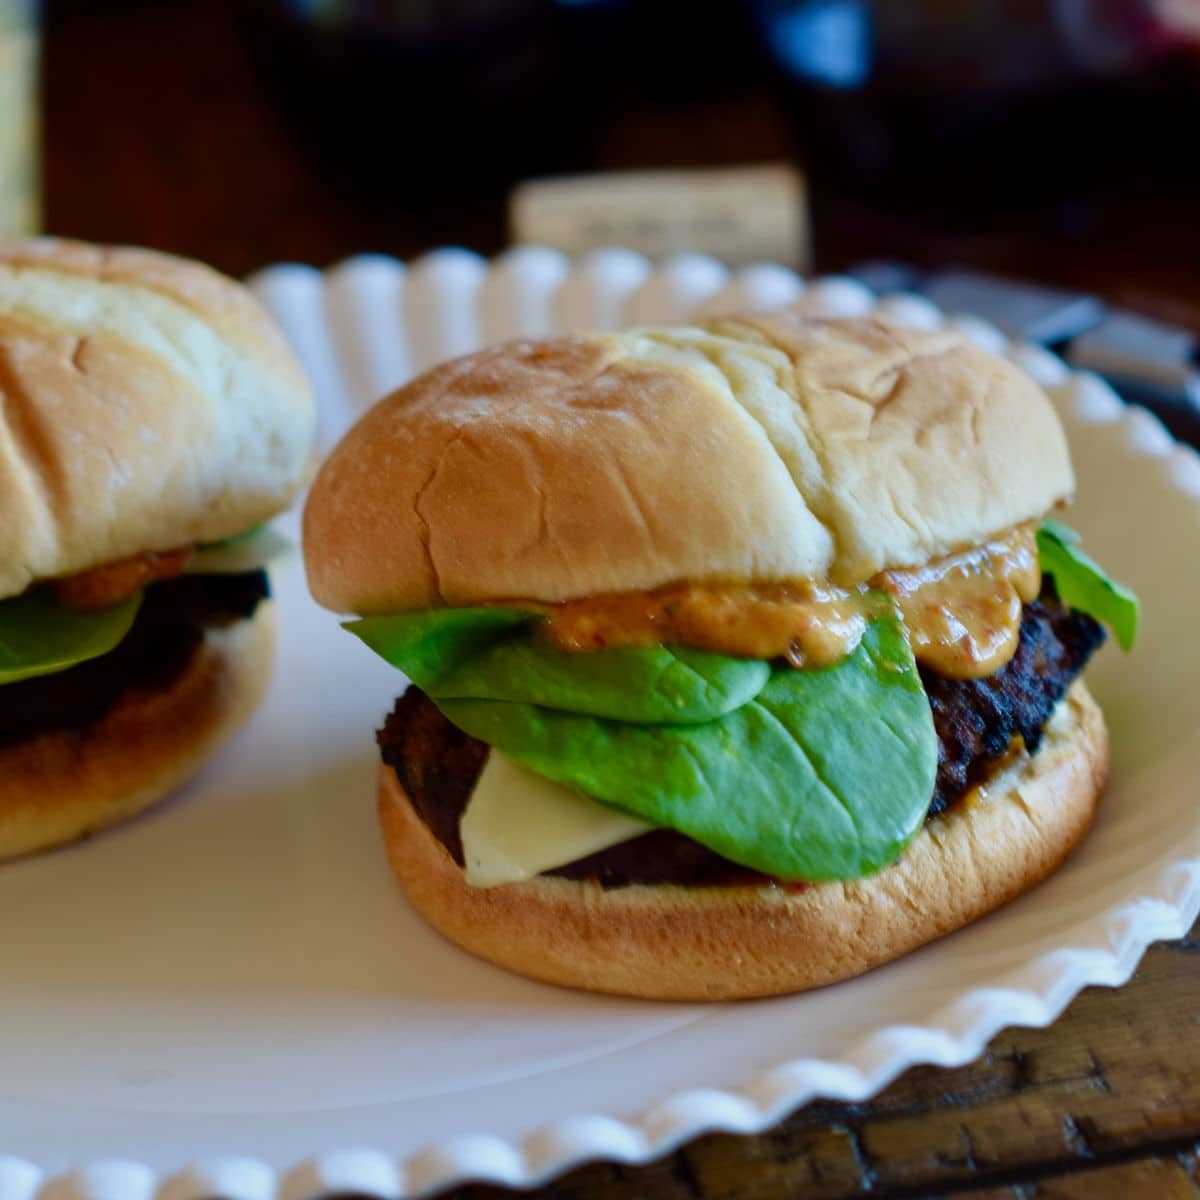 Caramelized Bacon Onion Burger being served on a white paper plate.